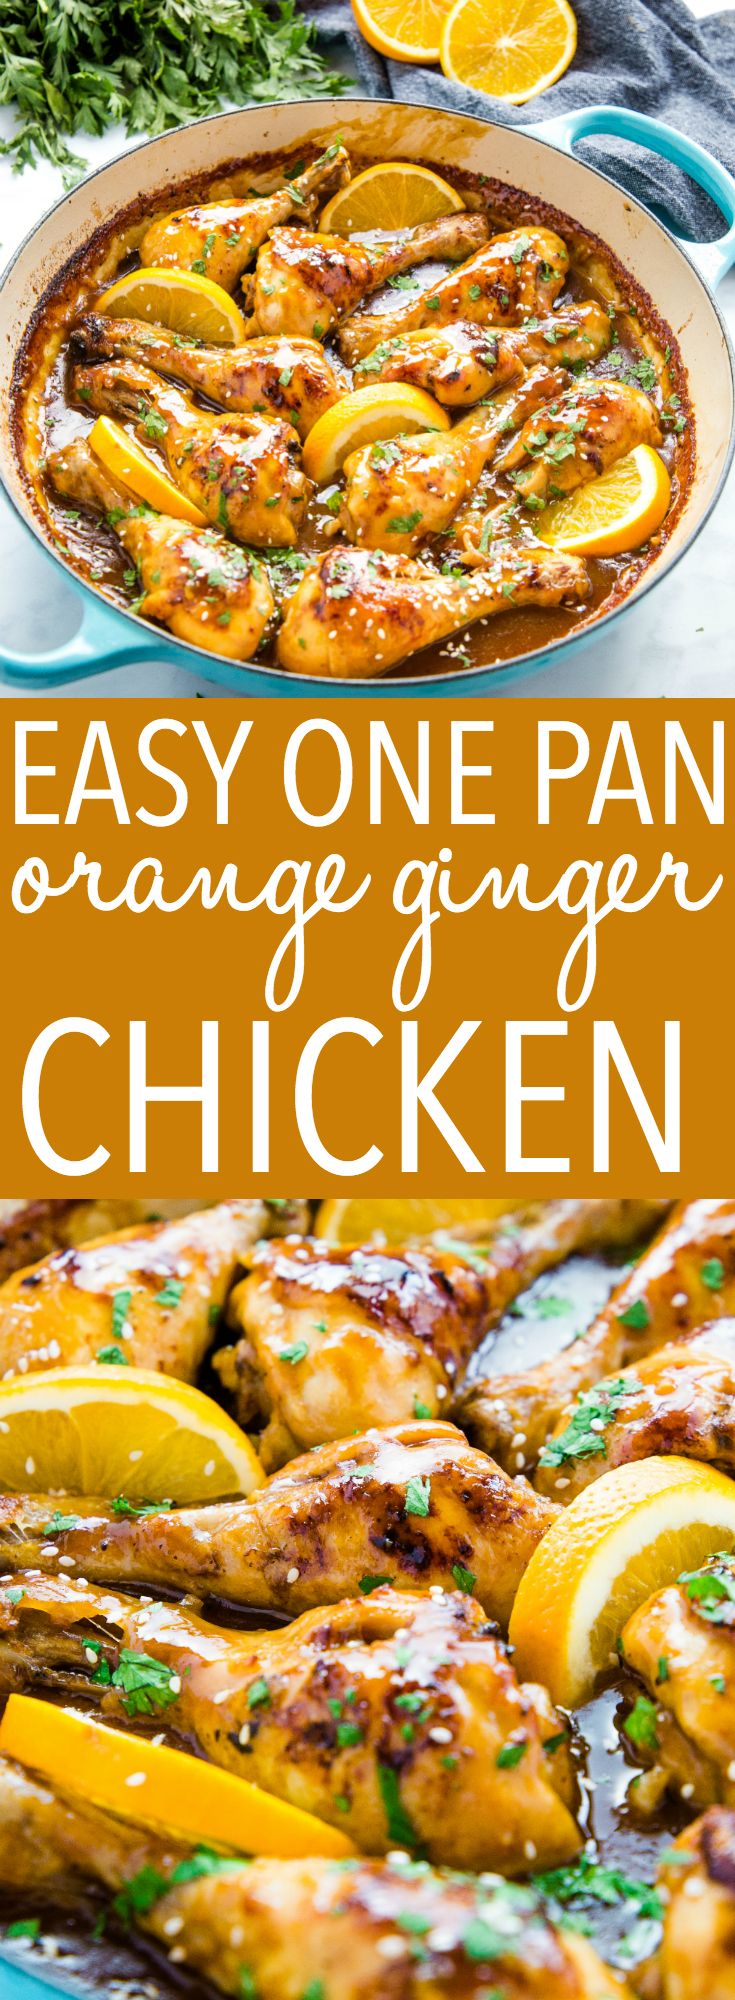 This Easy One Pan Orange Ginger Chicken is a delicious weeknight meal idea - a sticky sweet sauce over tender chicken with fresh orange and ginger! Recipe from thebusybaker.ca! #orangechicken #gingerchicken #orange #ginger #chicken #onepan #easymeal #weeknightmeal #chickenrecipe #lecreuset #healthy #oven #roastedchicken via @busybakerblog